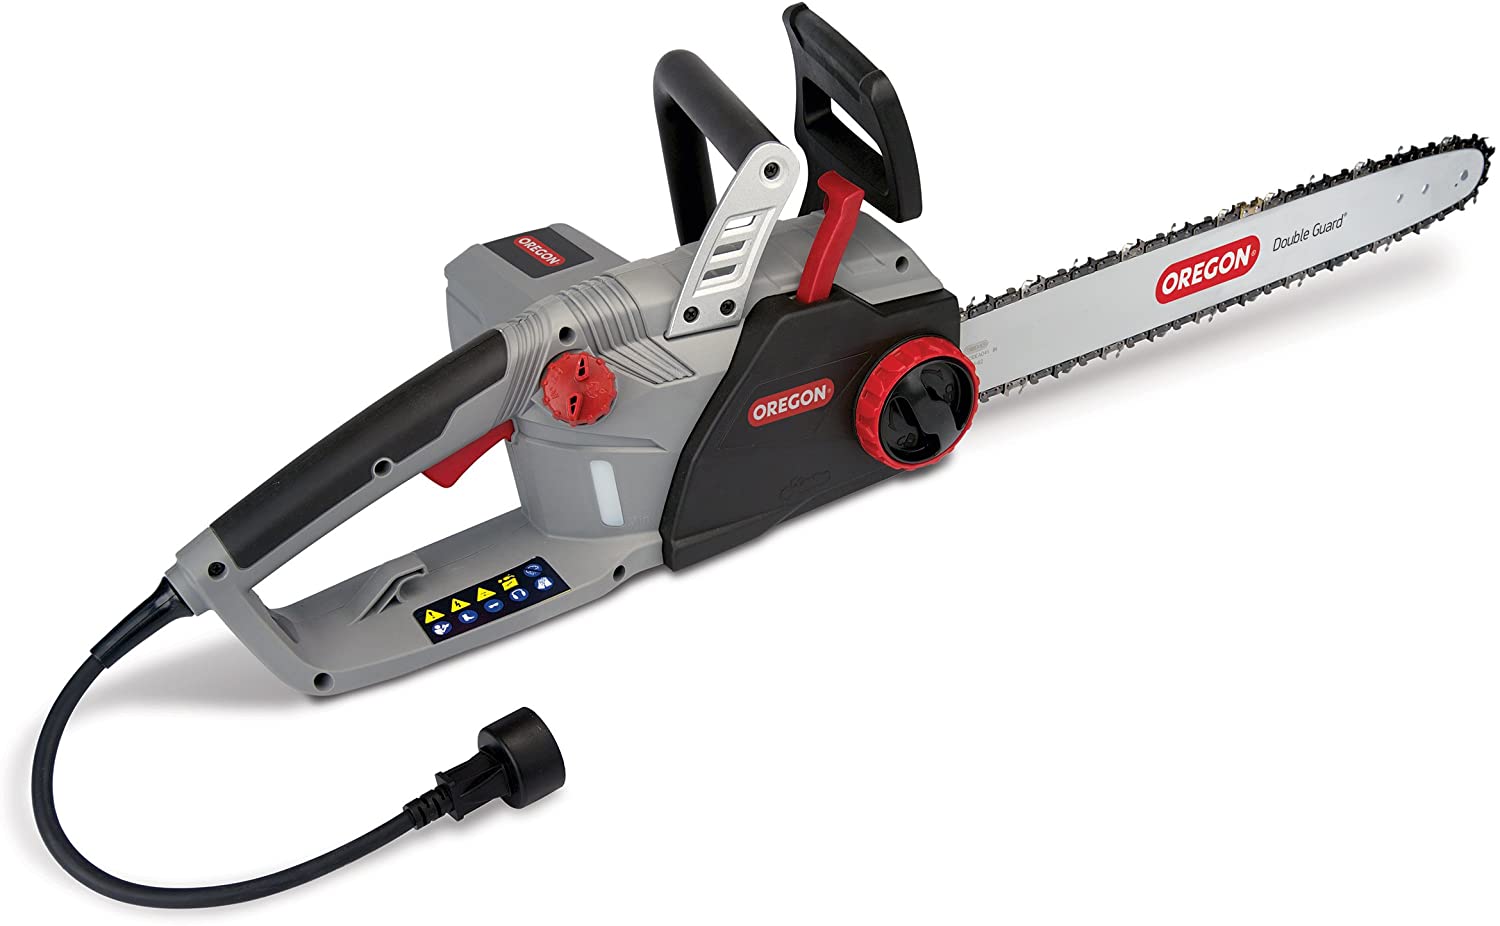 10 Best Small Chainsaws Reviews & Buyer's Guide